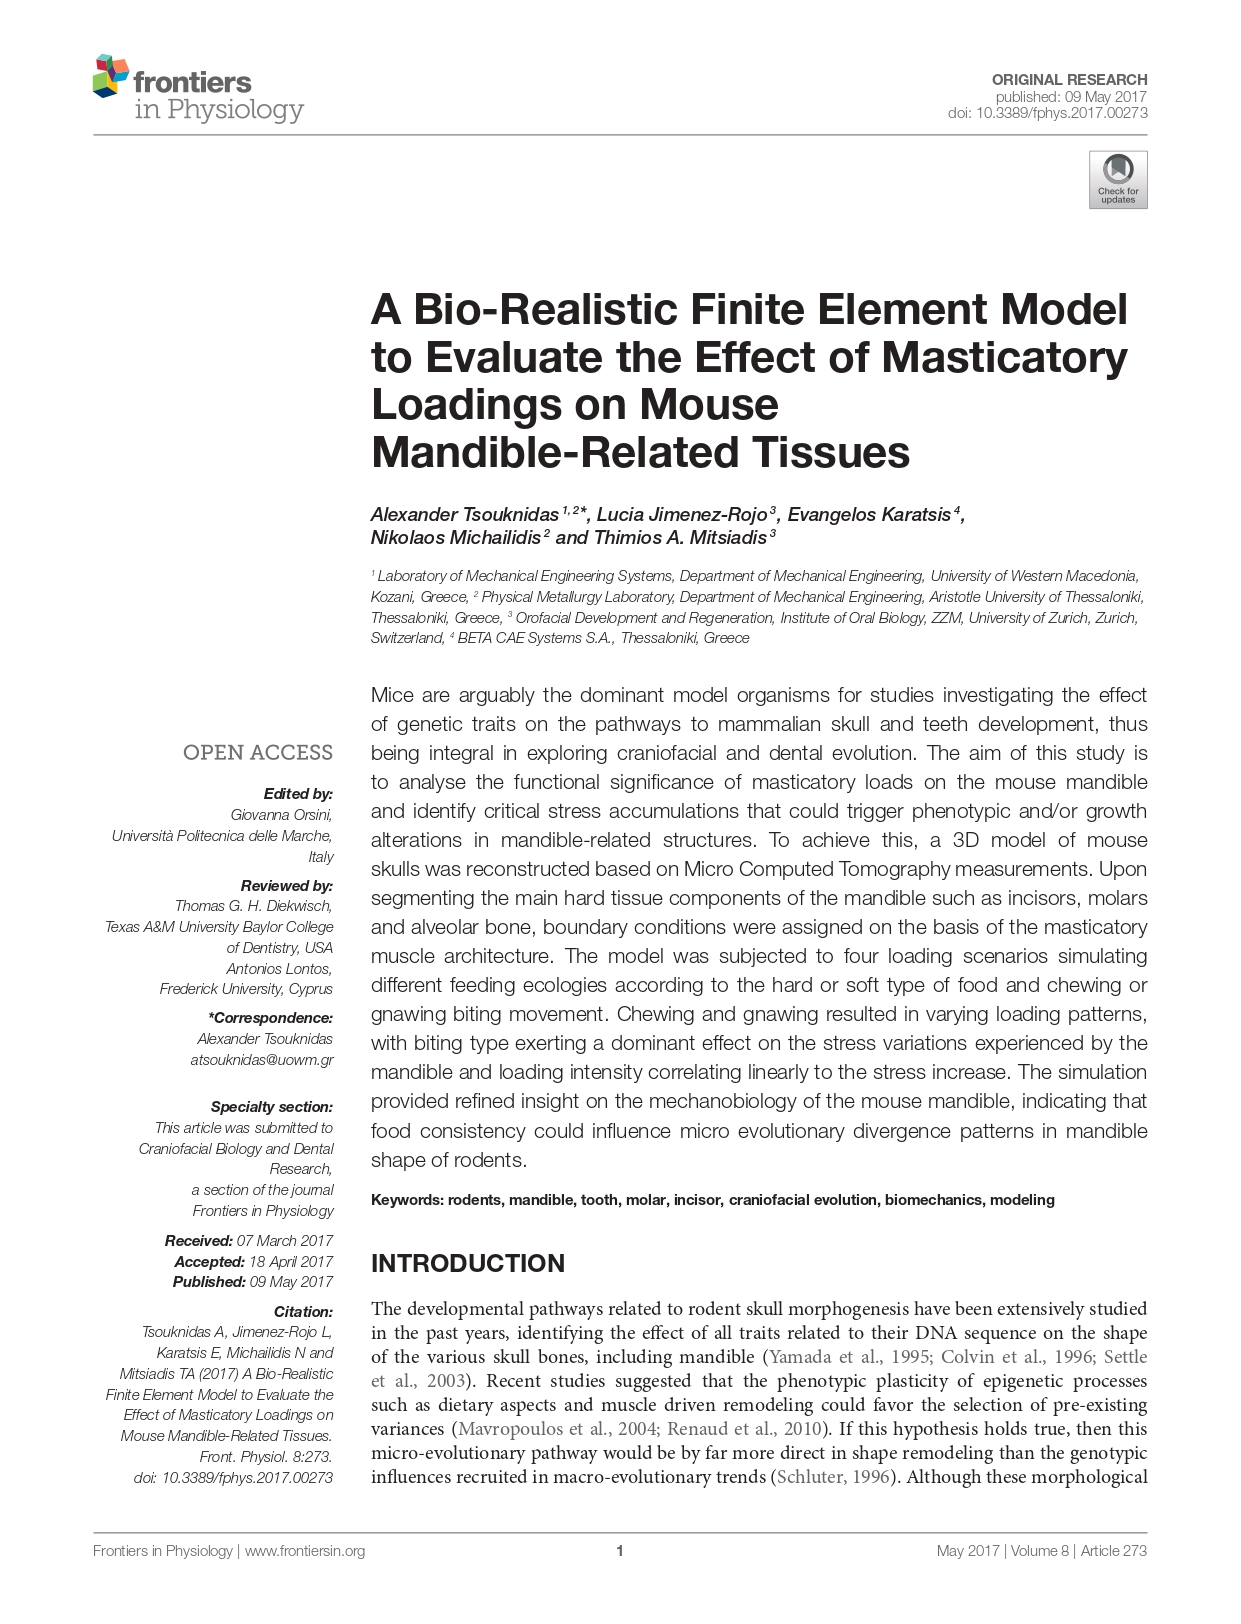 A bio-realistic finite element model to evaluate the effect of masticatory loadings on mouse mandible-related tissues